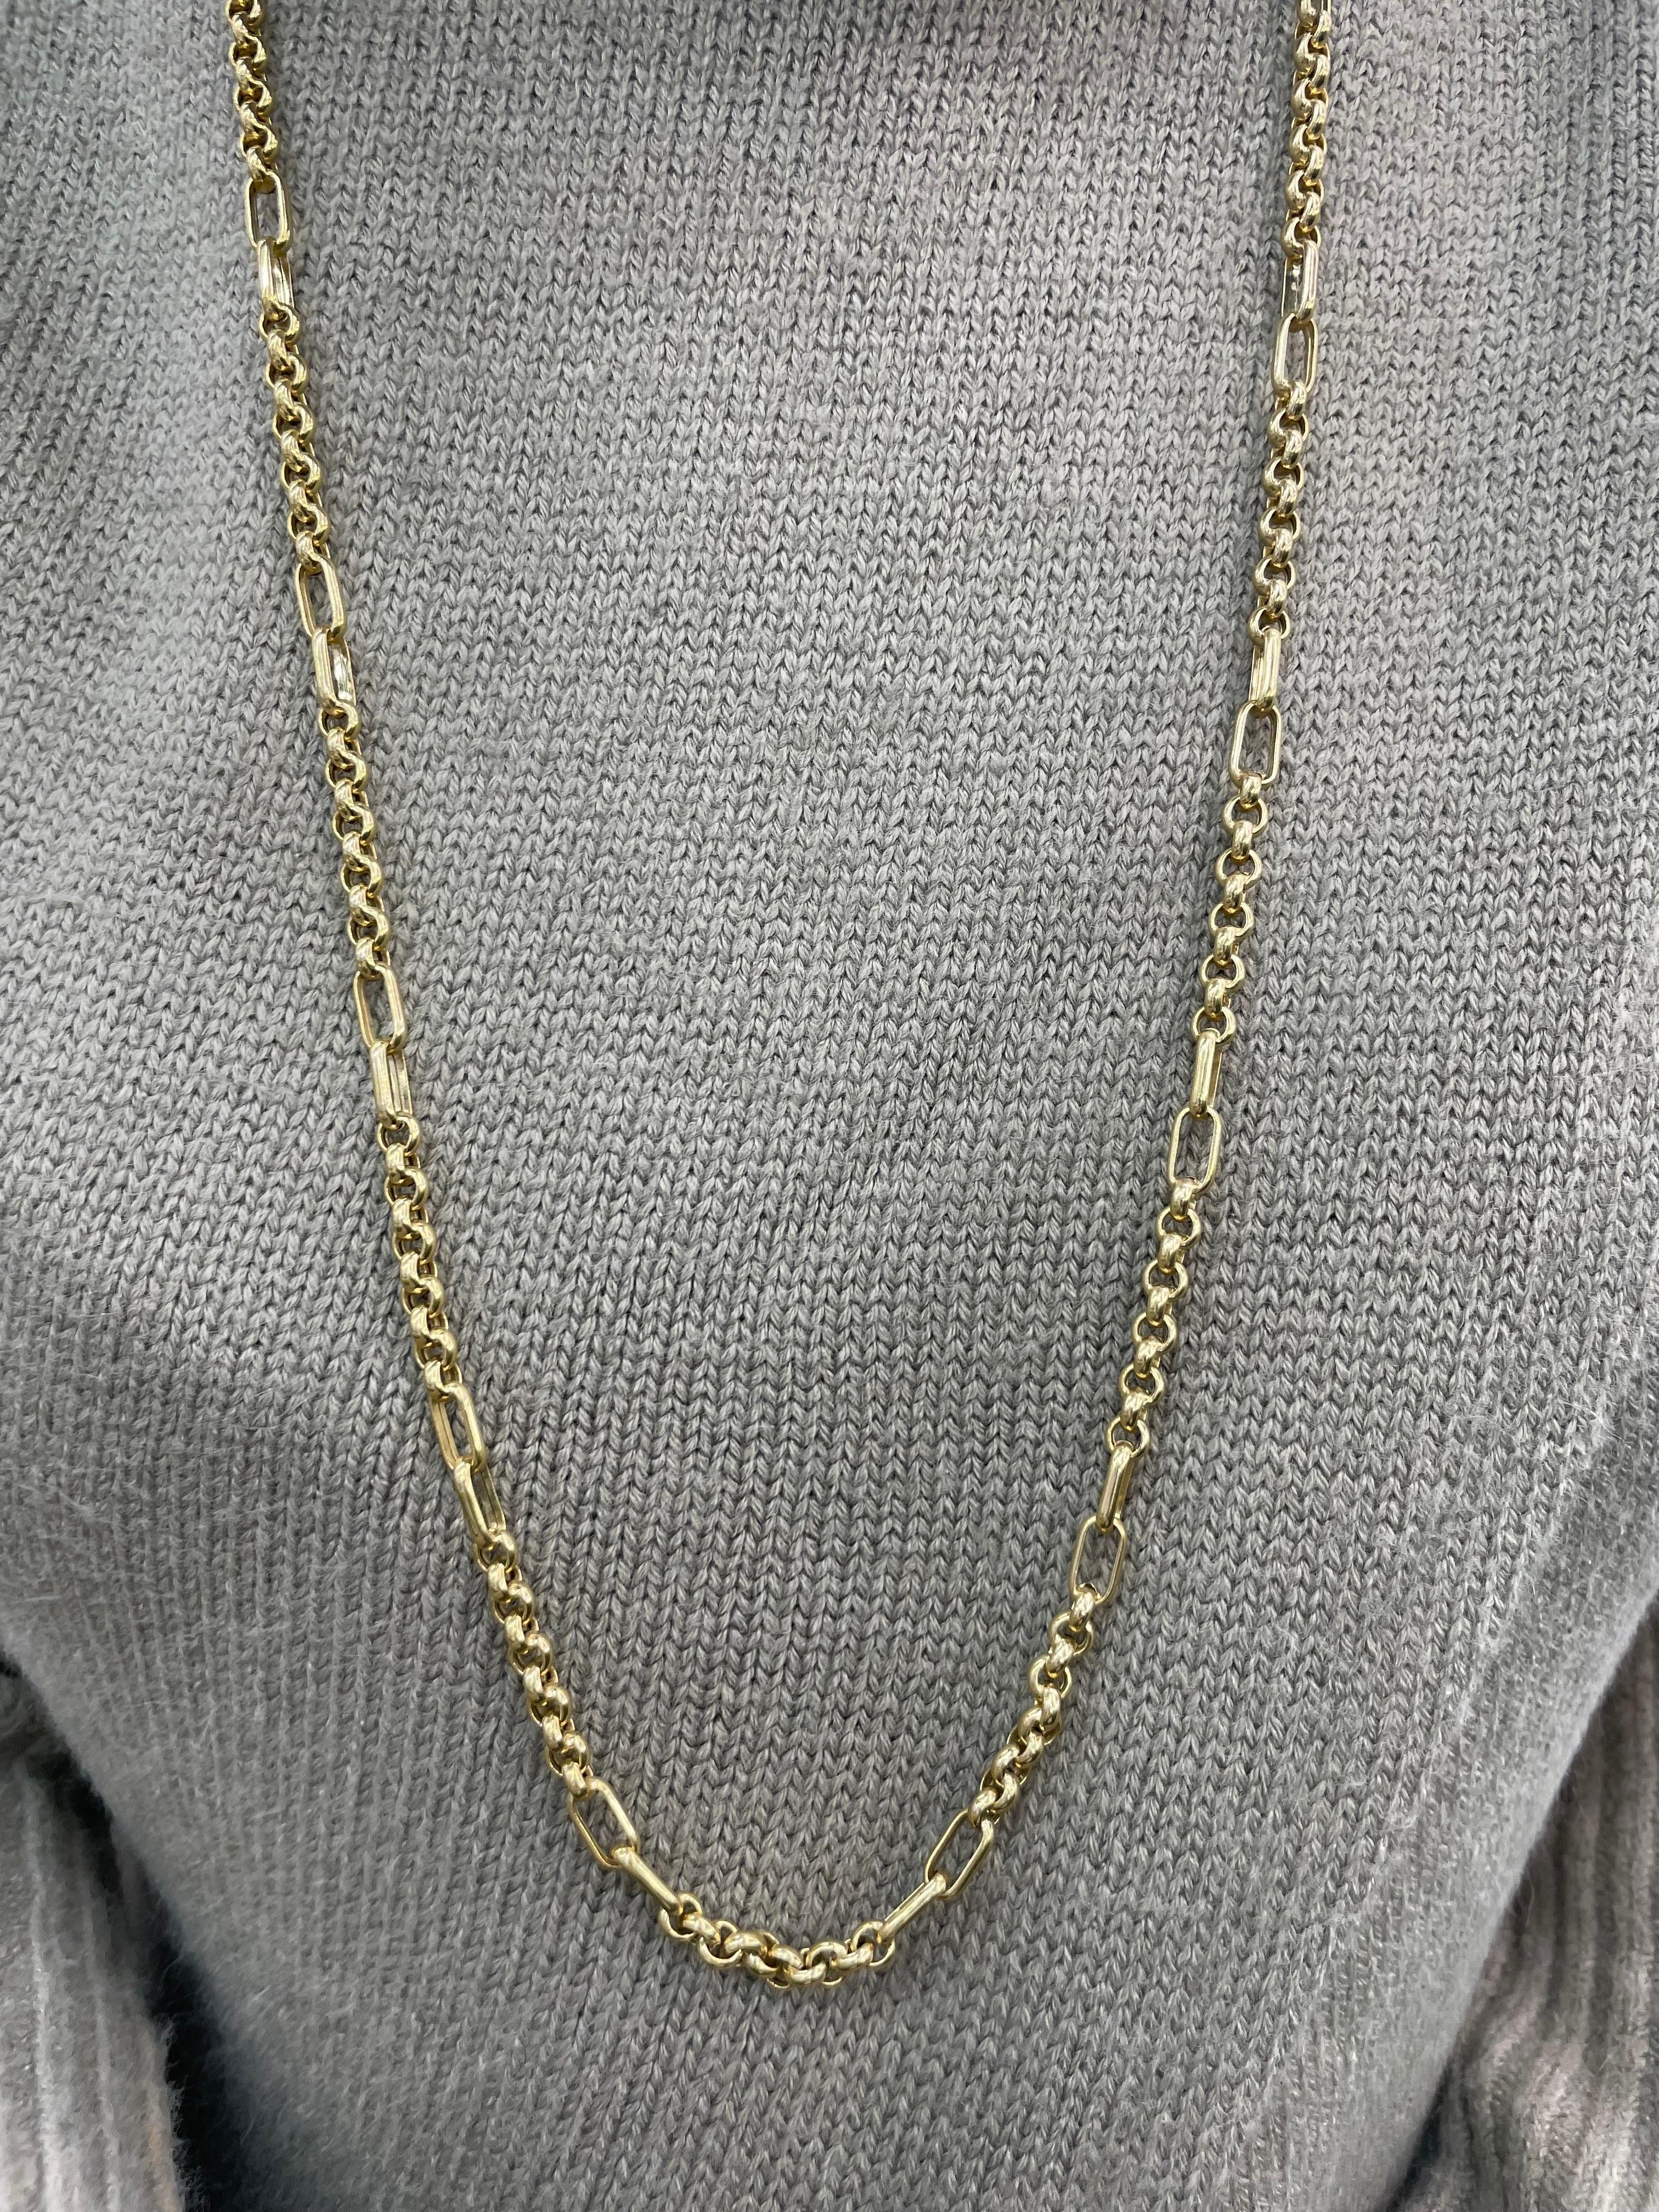 14 Karat Yellow Gold Link Necklace 25.6 Grams 36.5 Inches For Sale 5